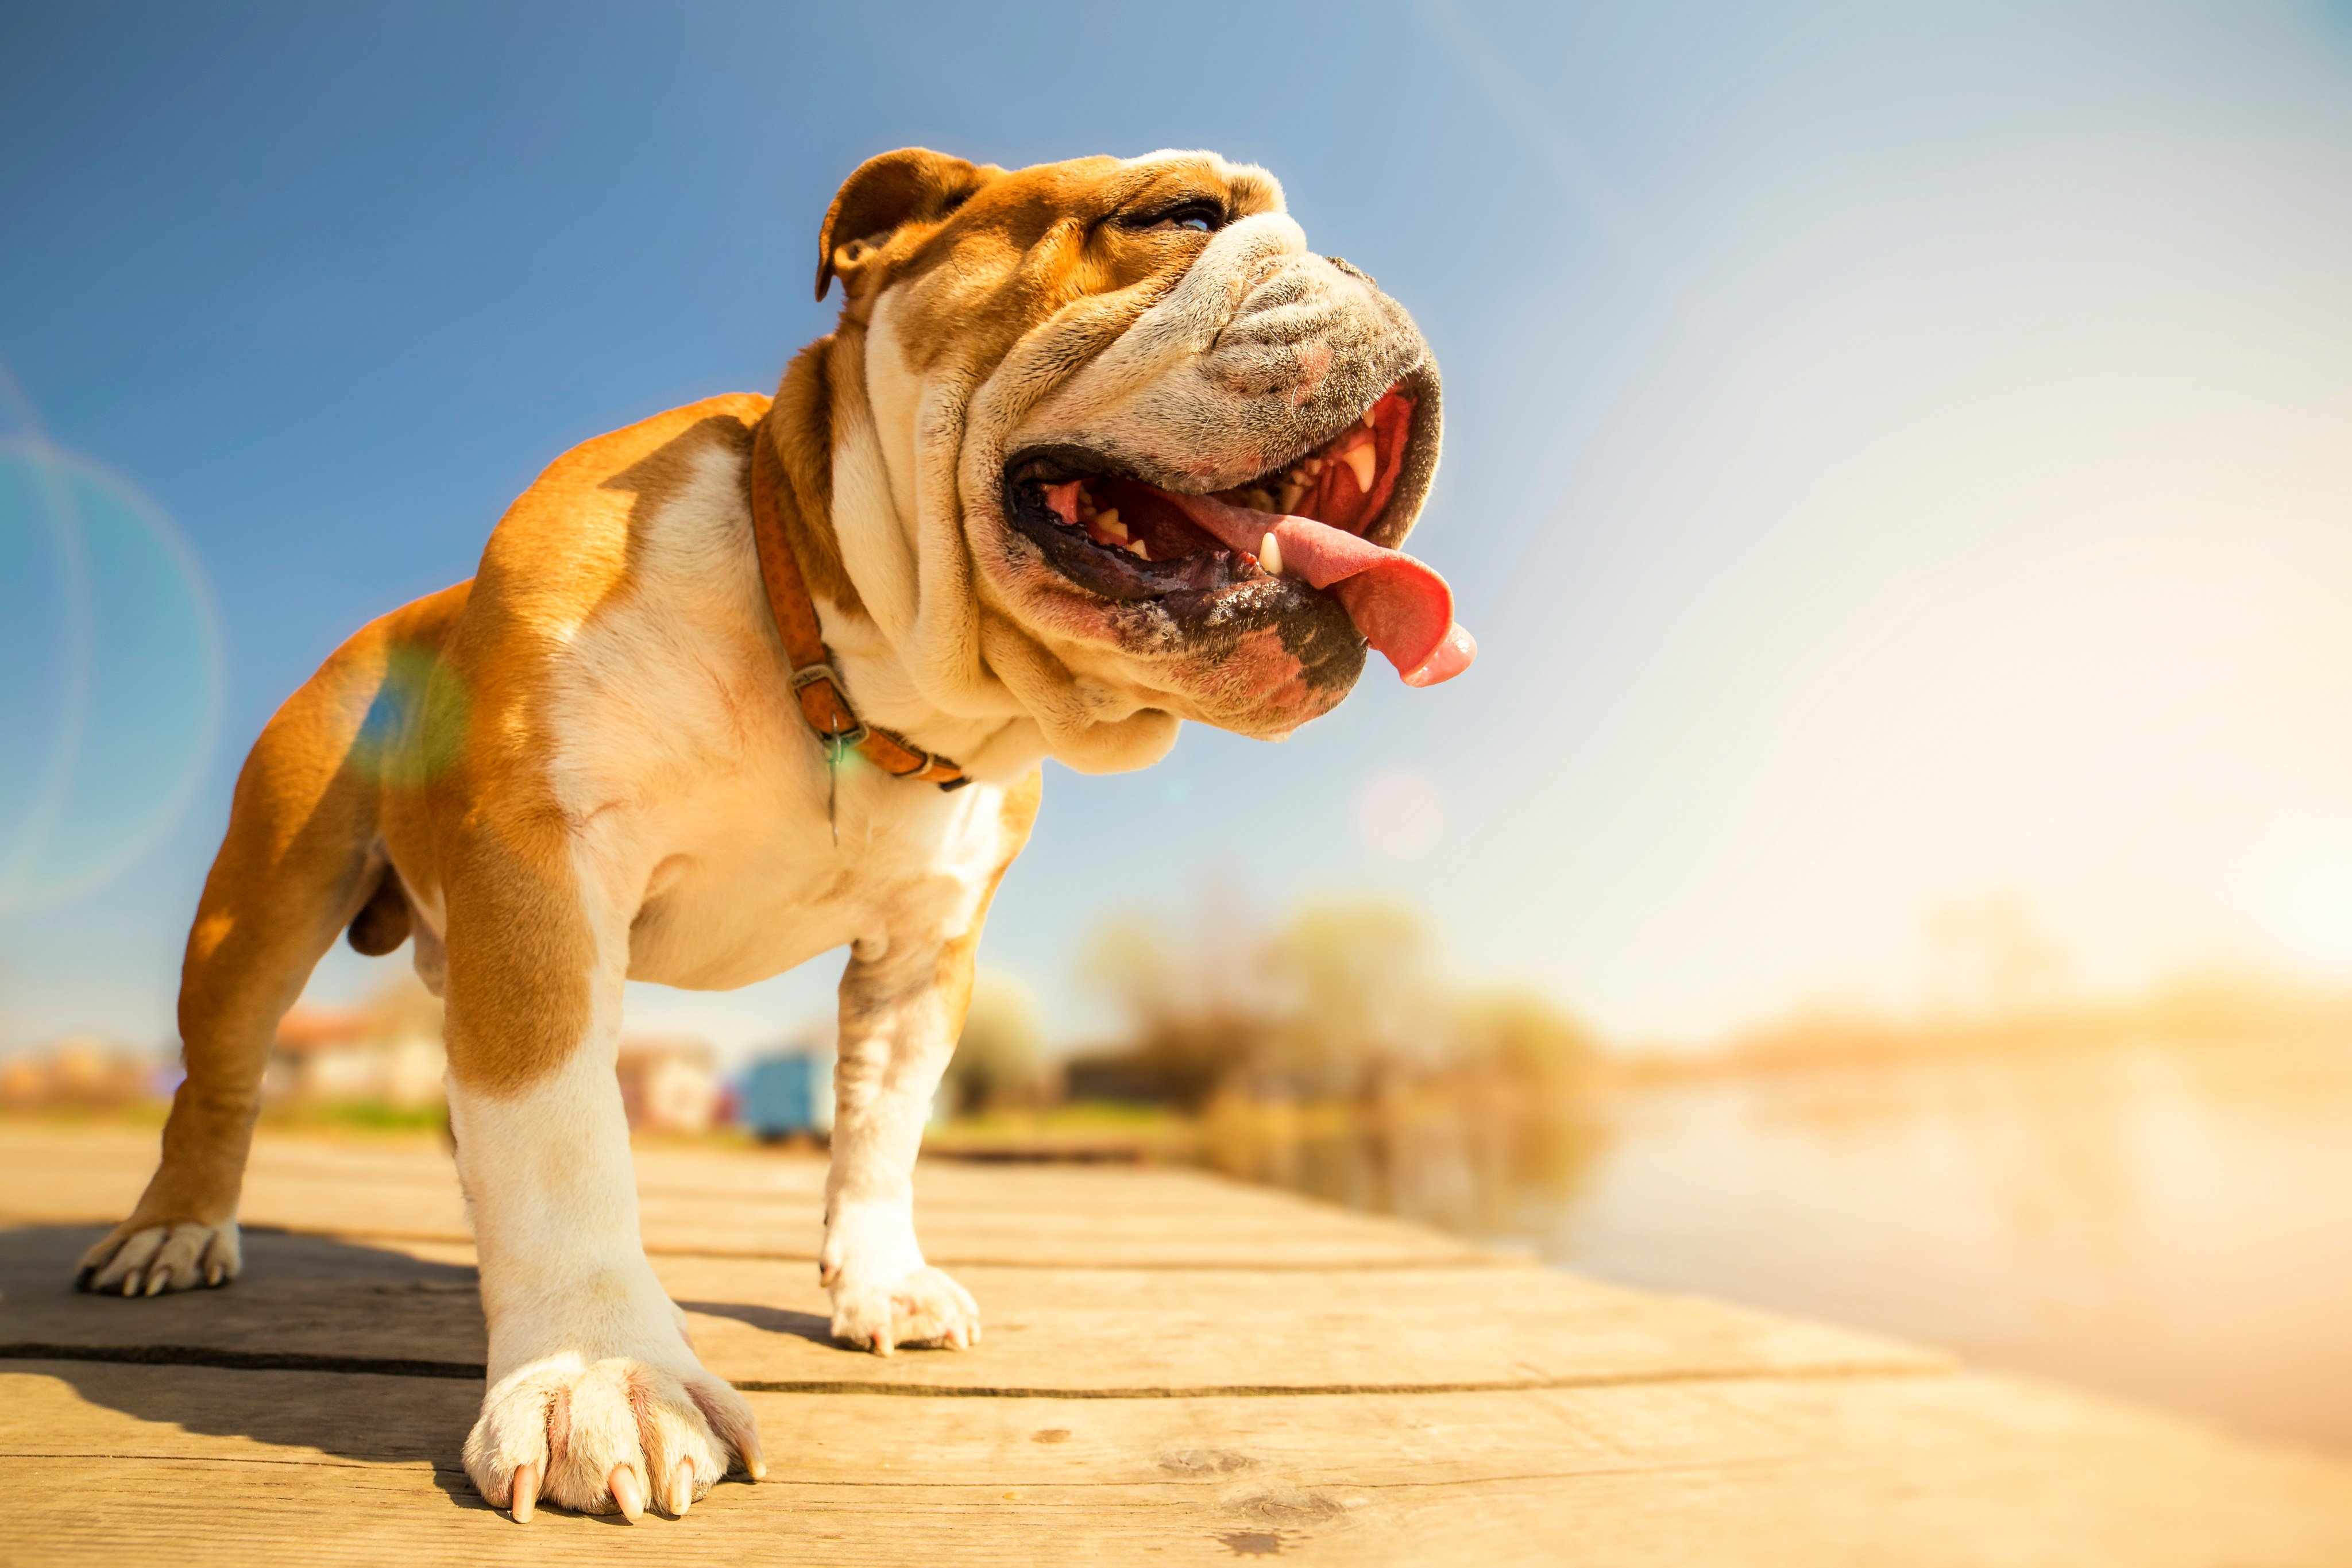 Snub-nosed dog breeds are most vulnerable to heat stroke. Photo: Shutterstock 